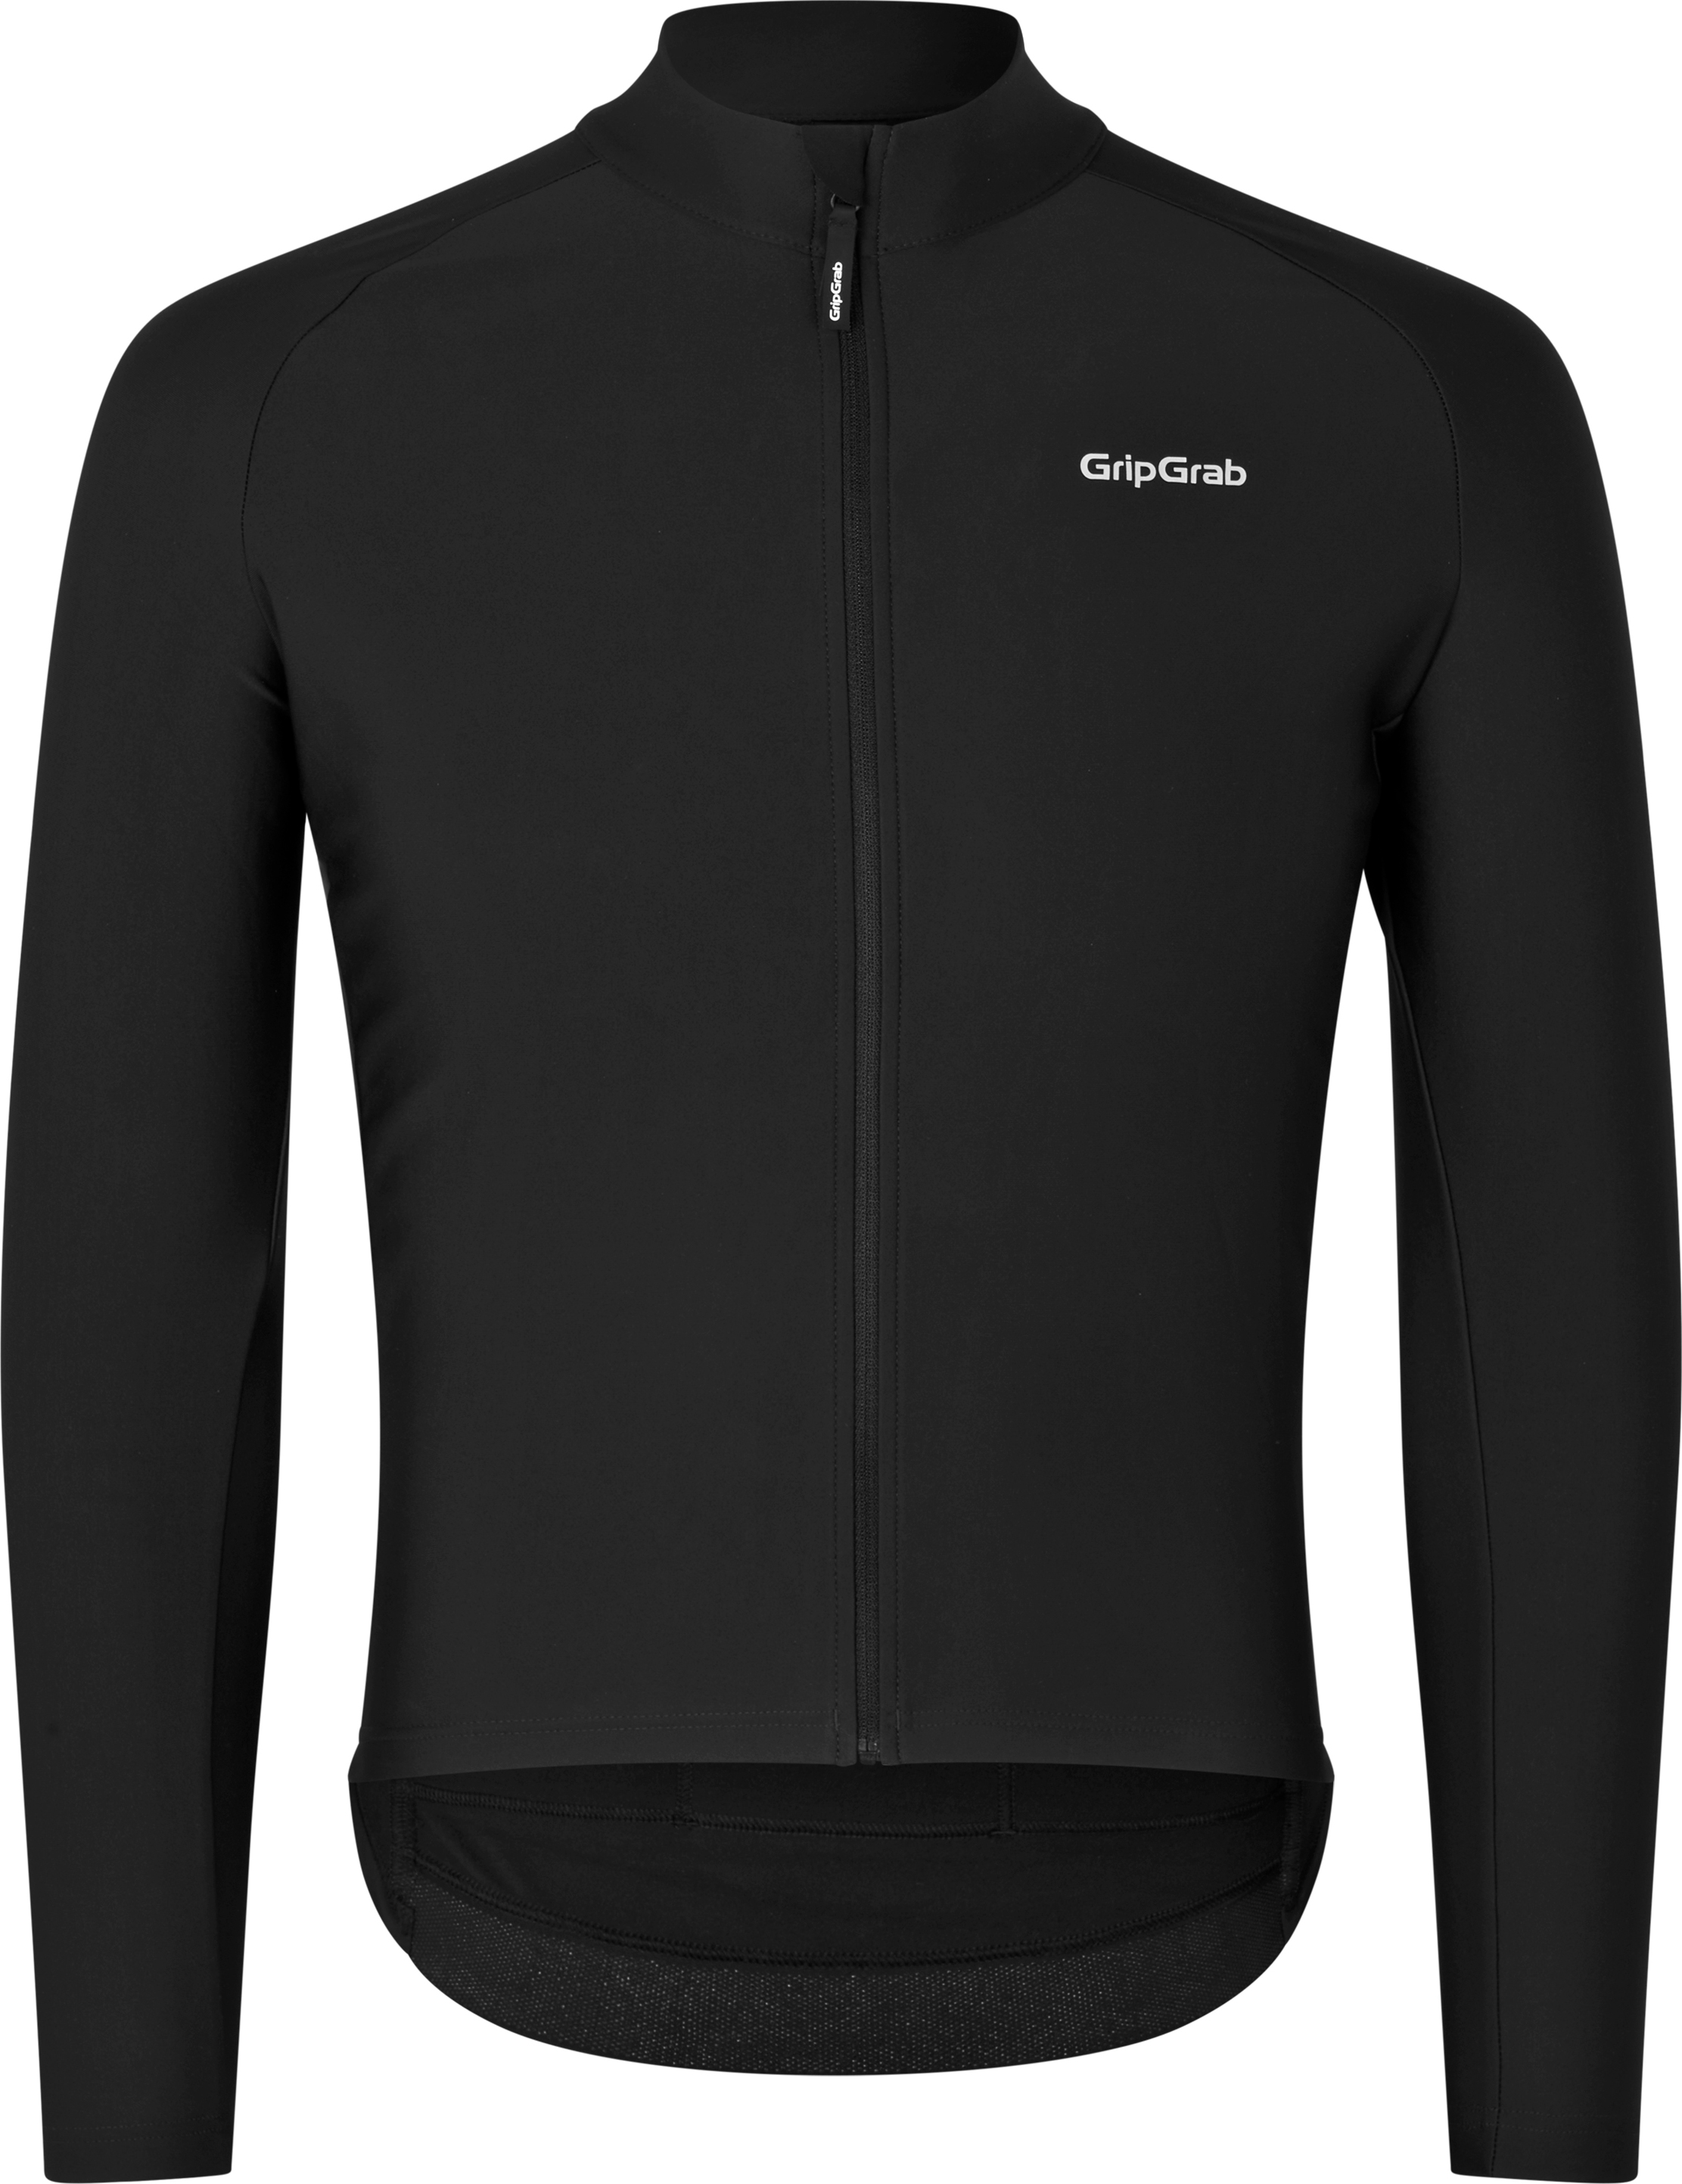 Men’s ThermaPace Thermal Long Sleeve Jersey Black